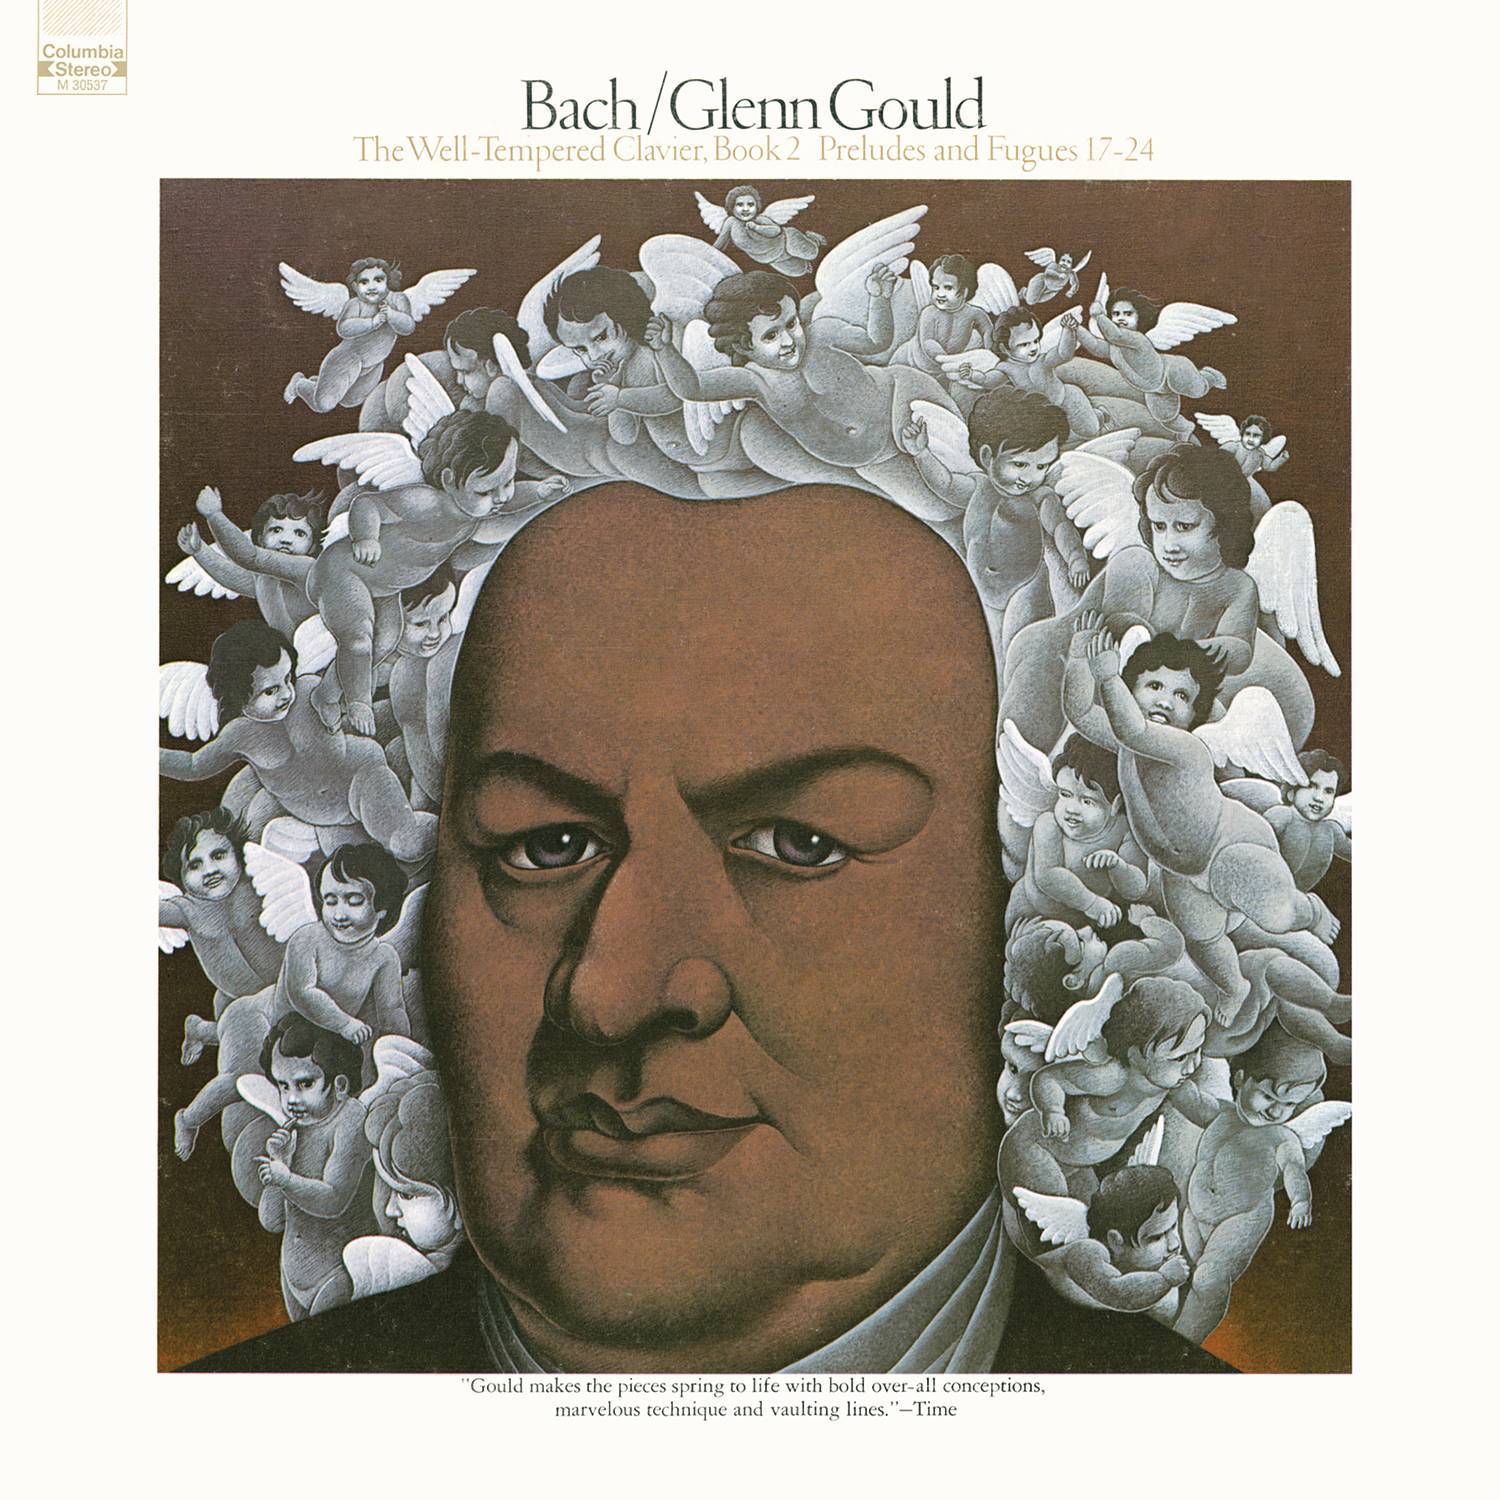 Bach: The Well-Tempered Clavier, Book II, Preludes & Fugues Nos. 17-24, BWV 886-893 - Gould Remastered